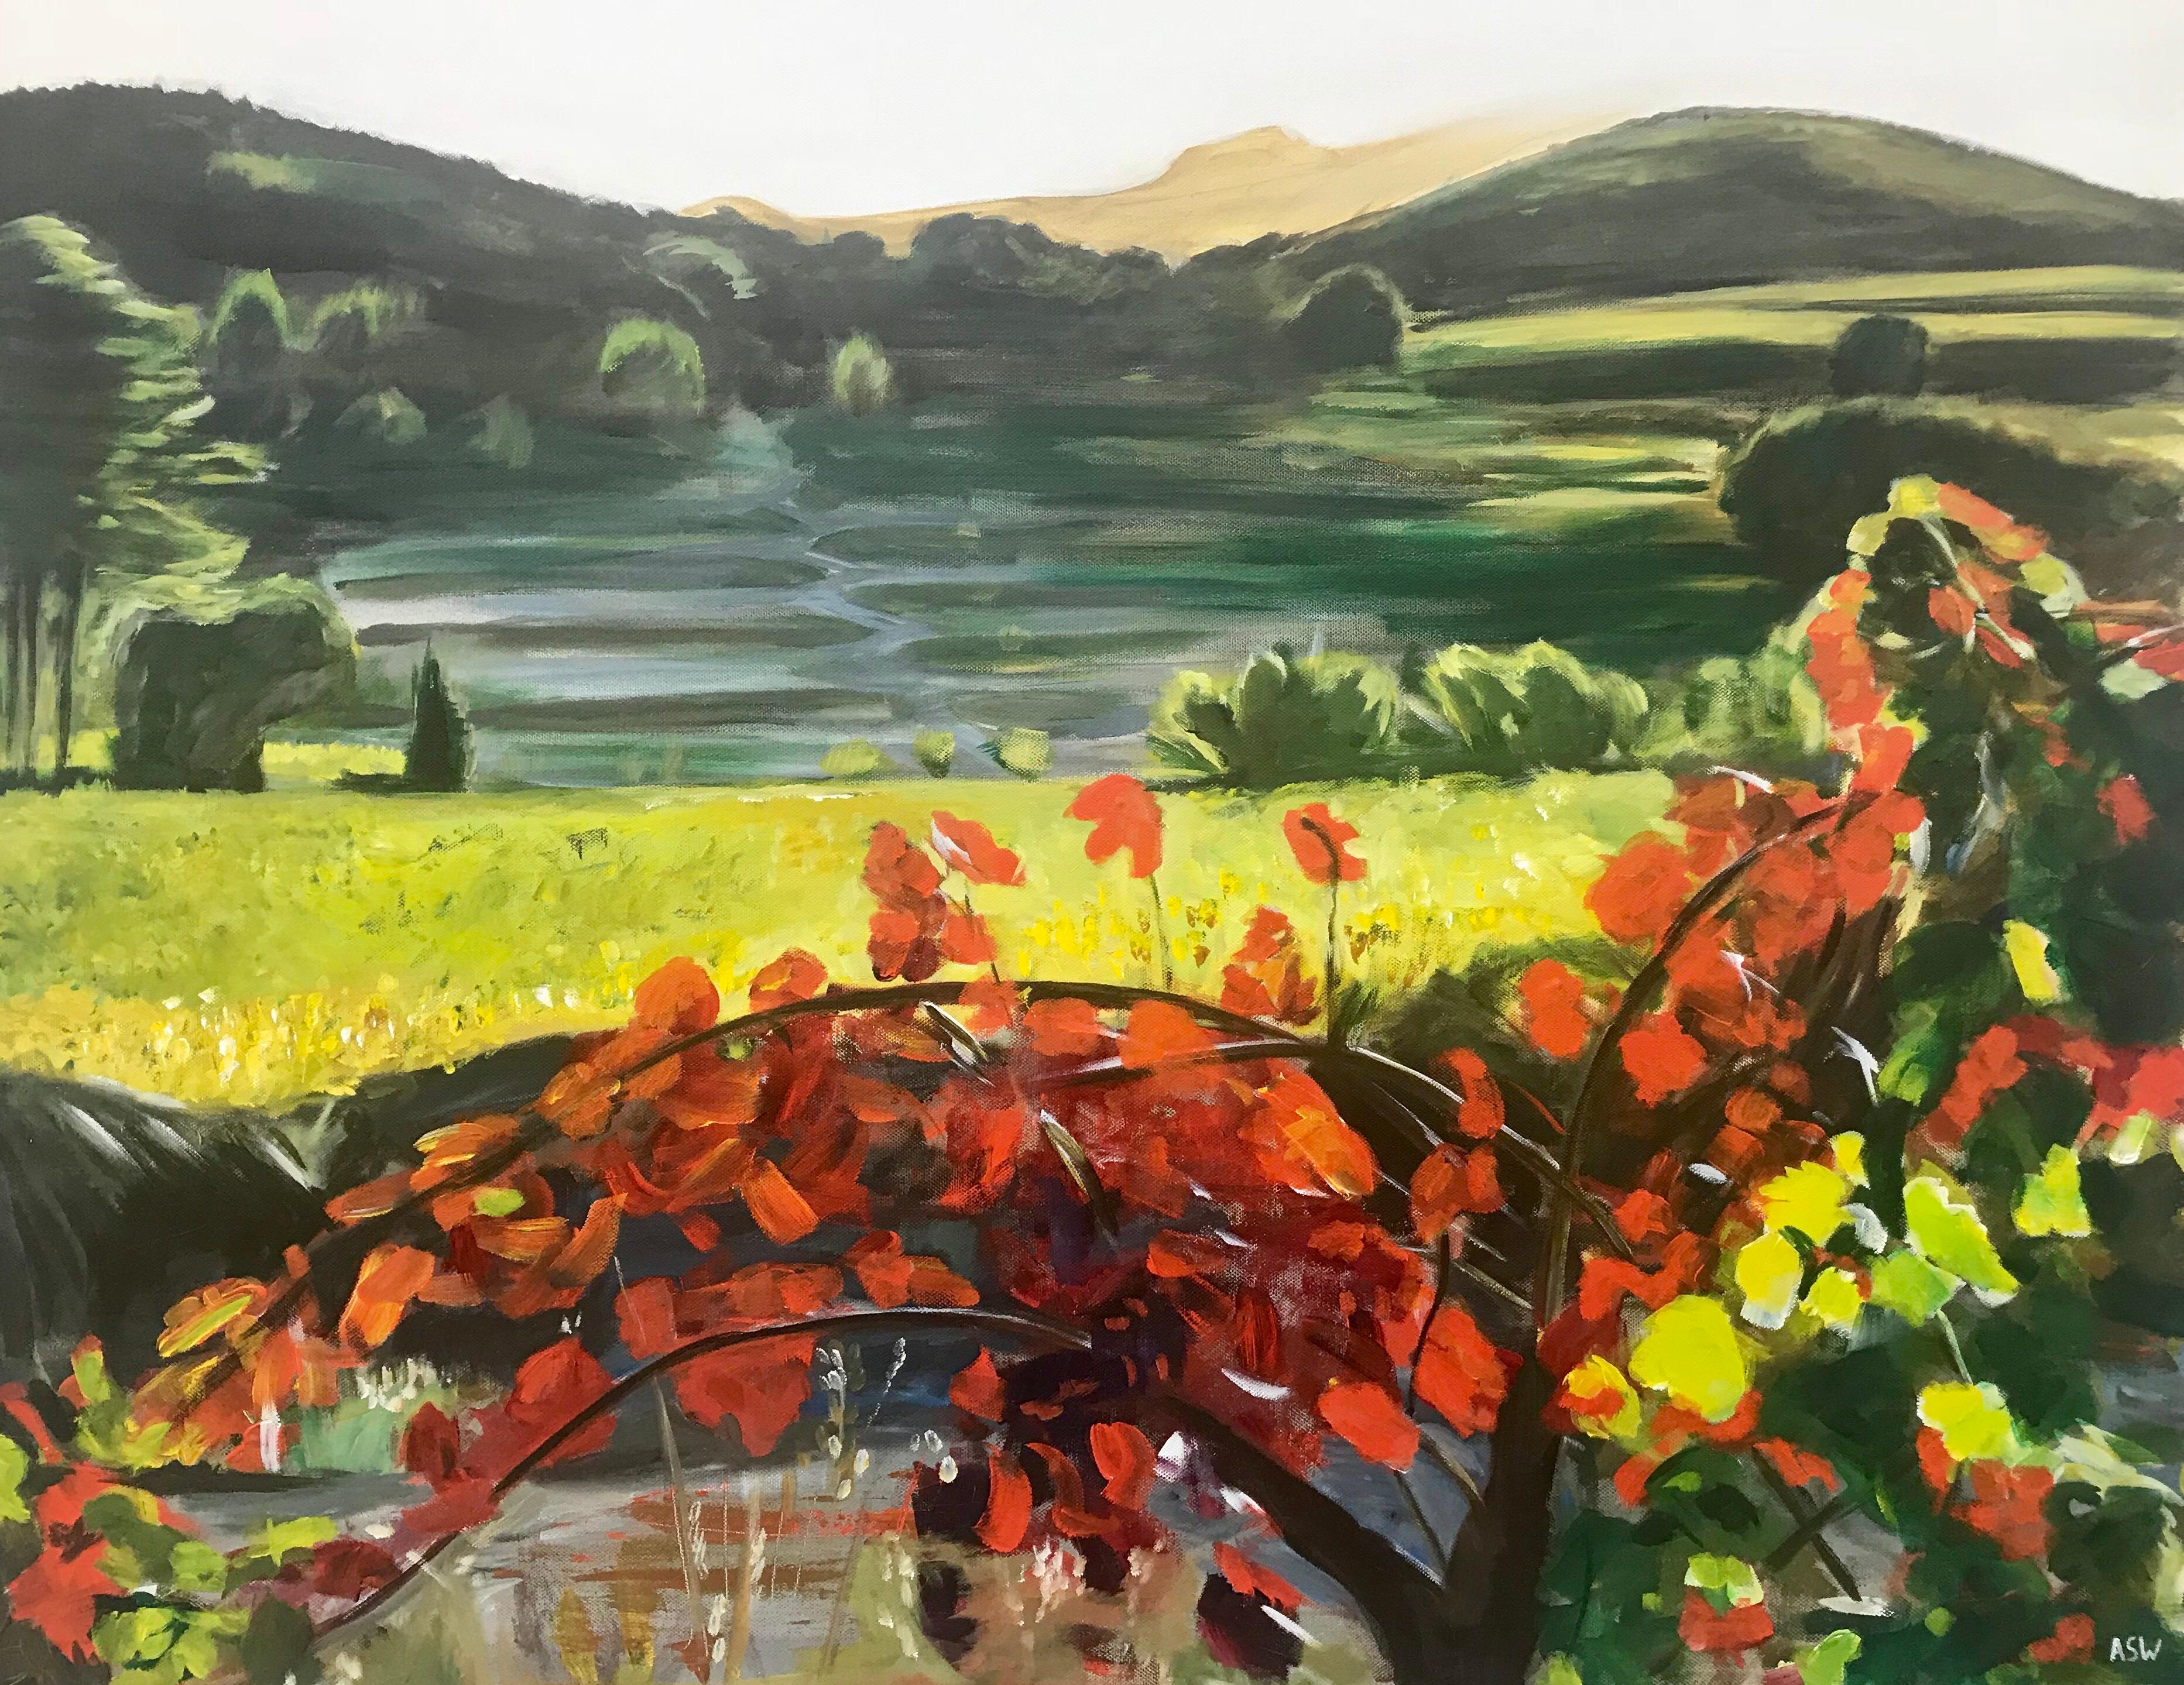 Angela Wakefield Figurative Painting – Painting of Hot Sunny Vineyard in Spain Countryside by English Landscape Artist